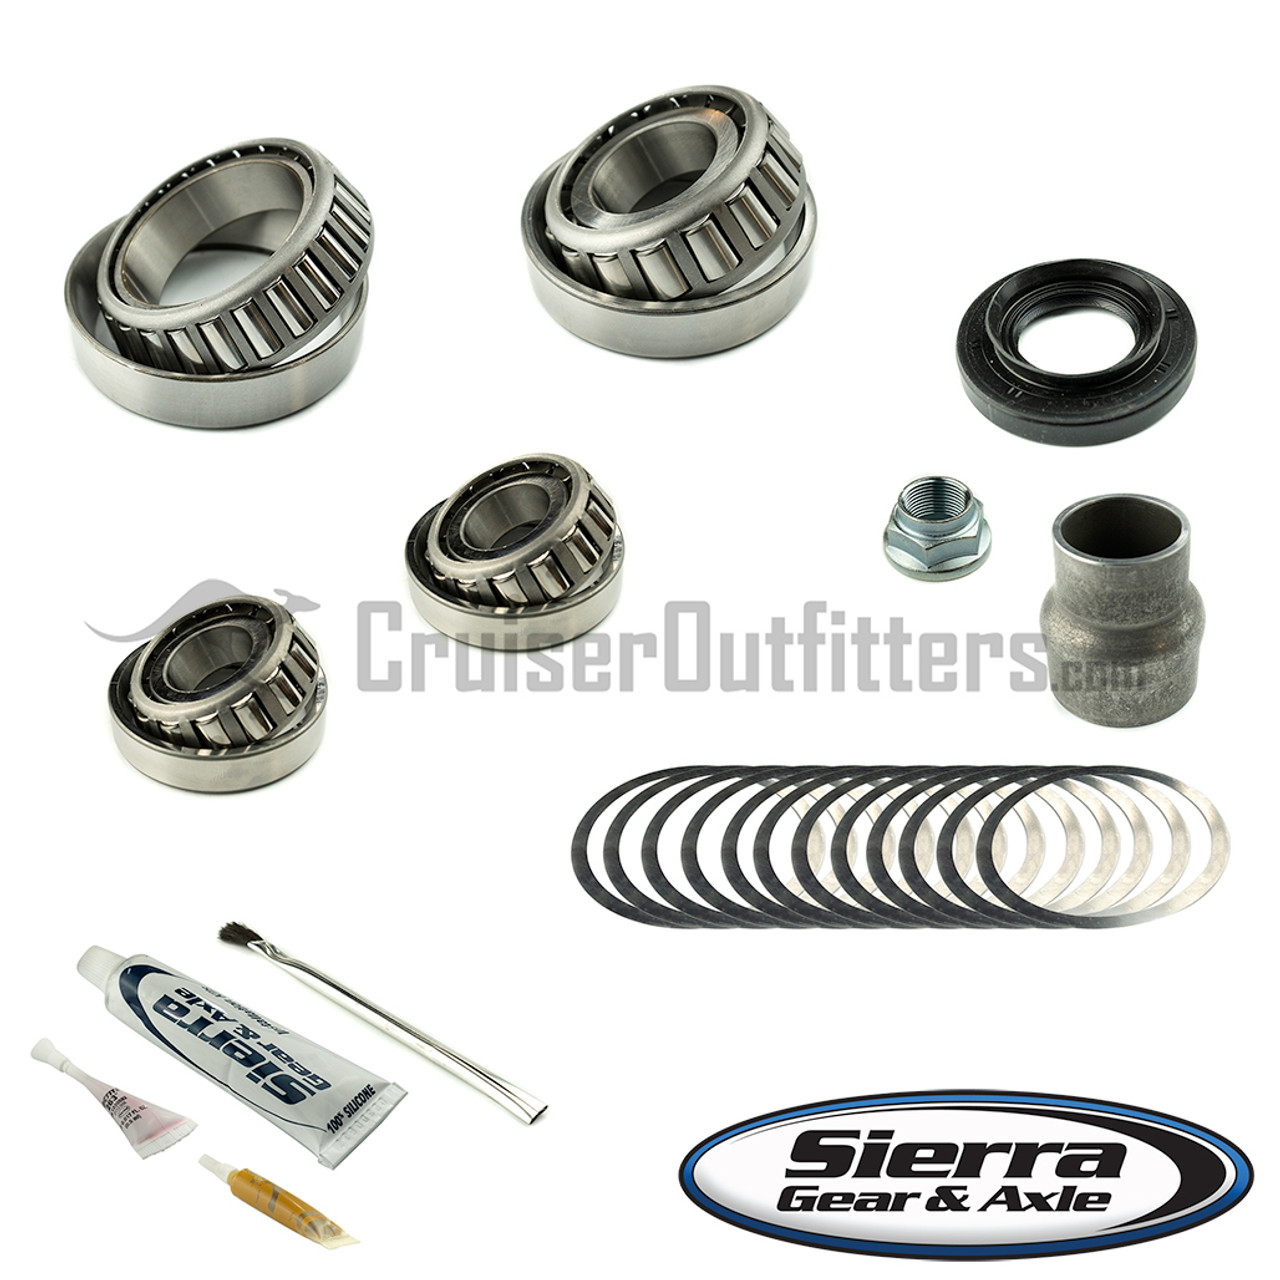 IKTOYLCBE100 - Ring and Pinion Install / Differential Overhaul Kit - Fits UZJ100 Rear With OEM E-Locker